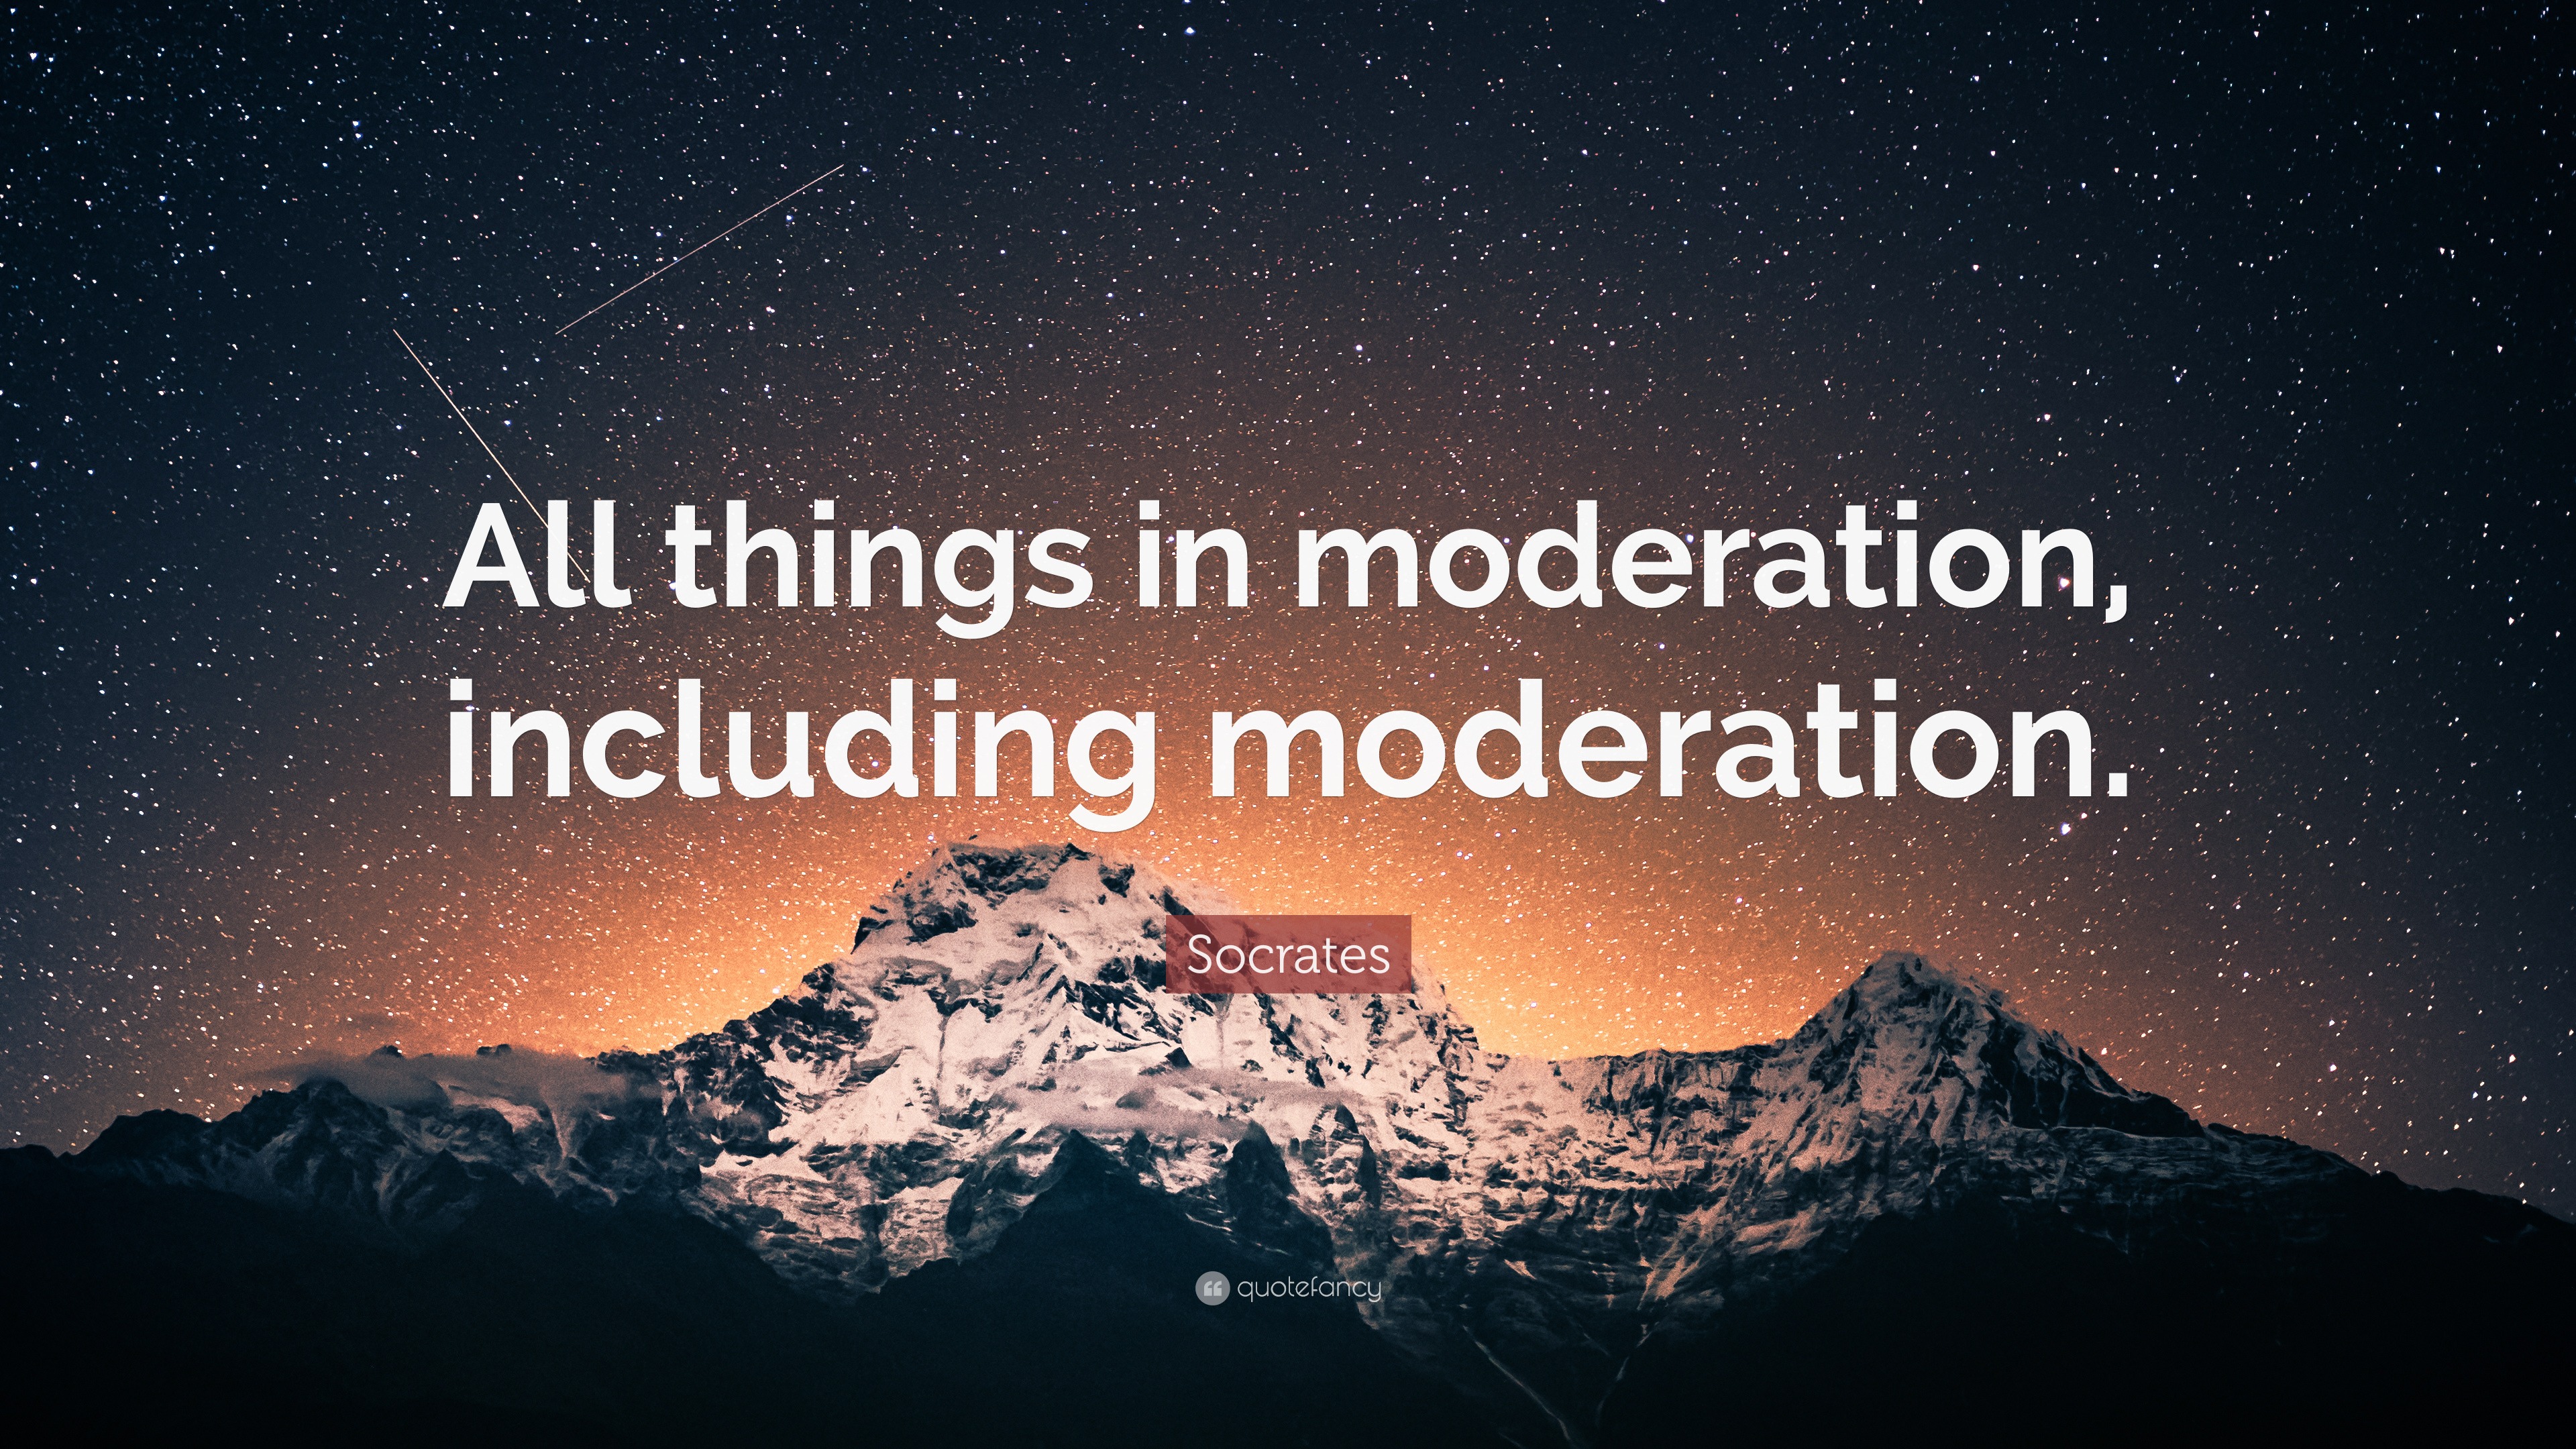 Socrates Quote: “All things in moderation, including moderation.”